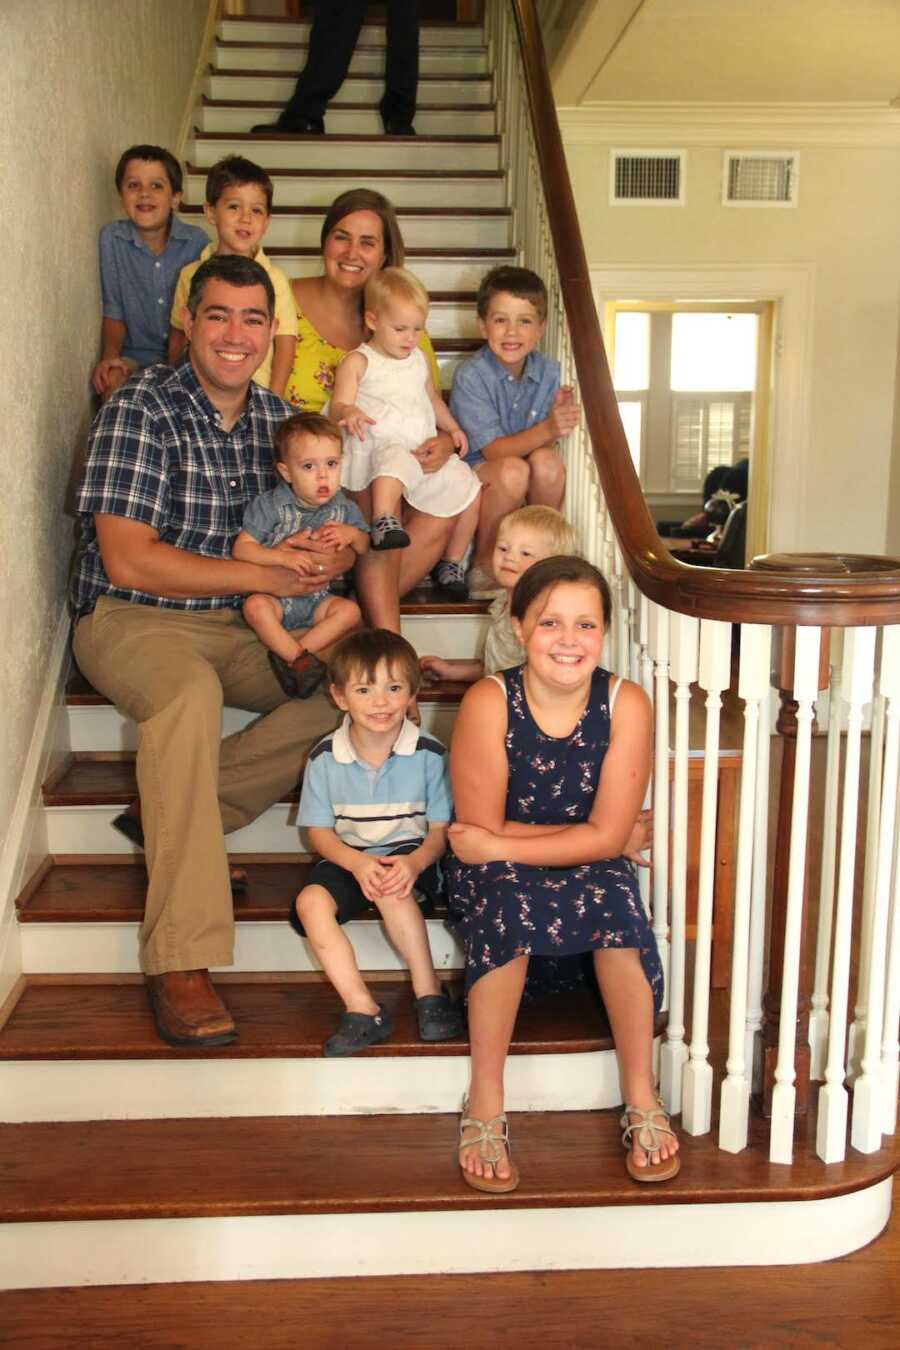 family gathers on stairs together on adoption day of their children